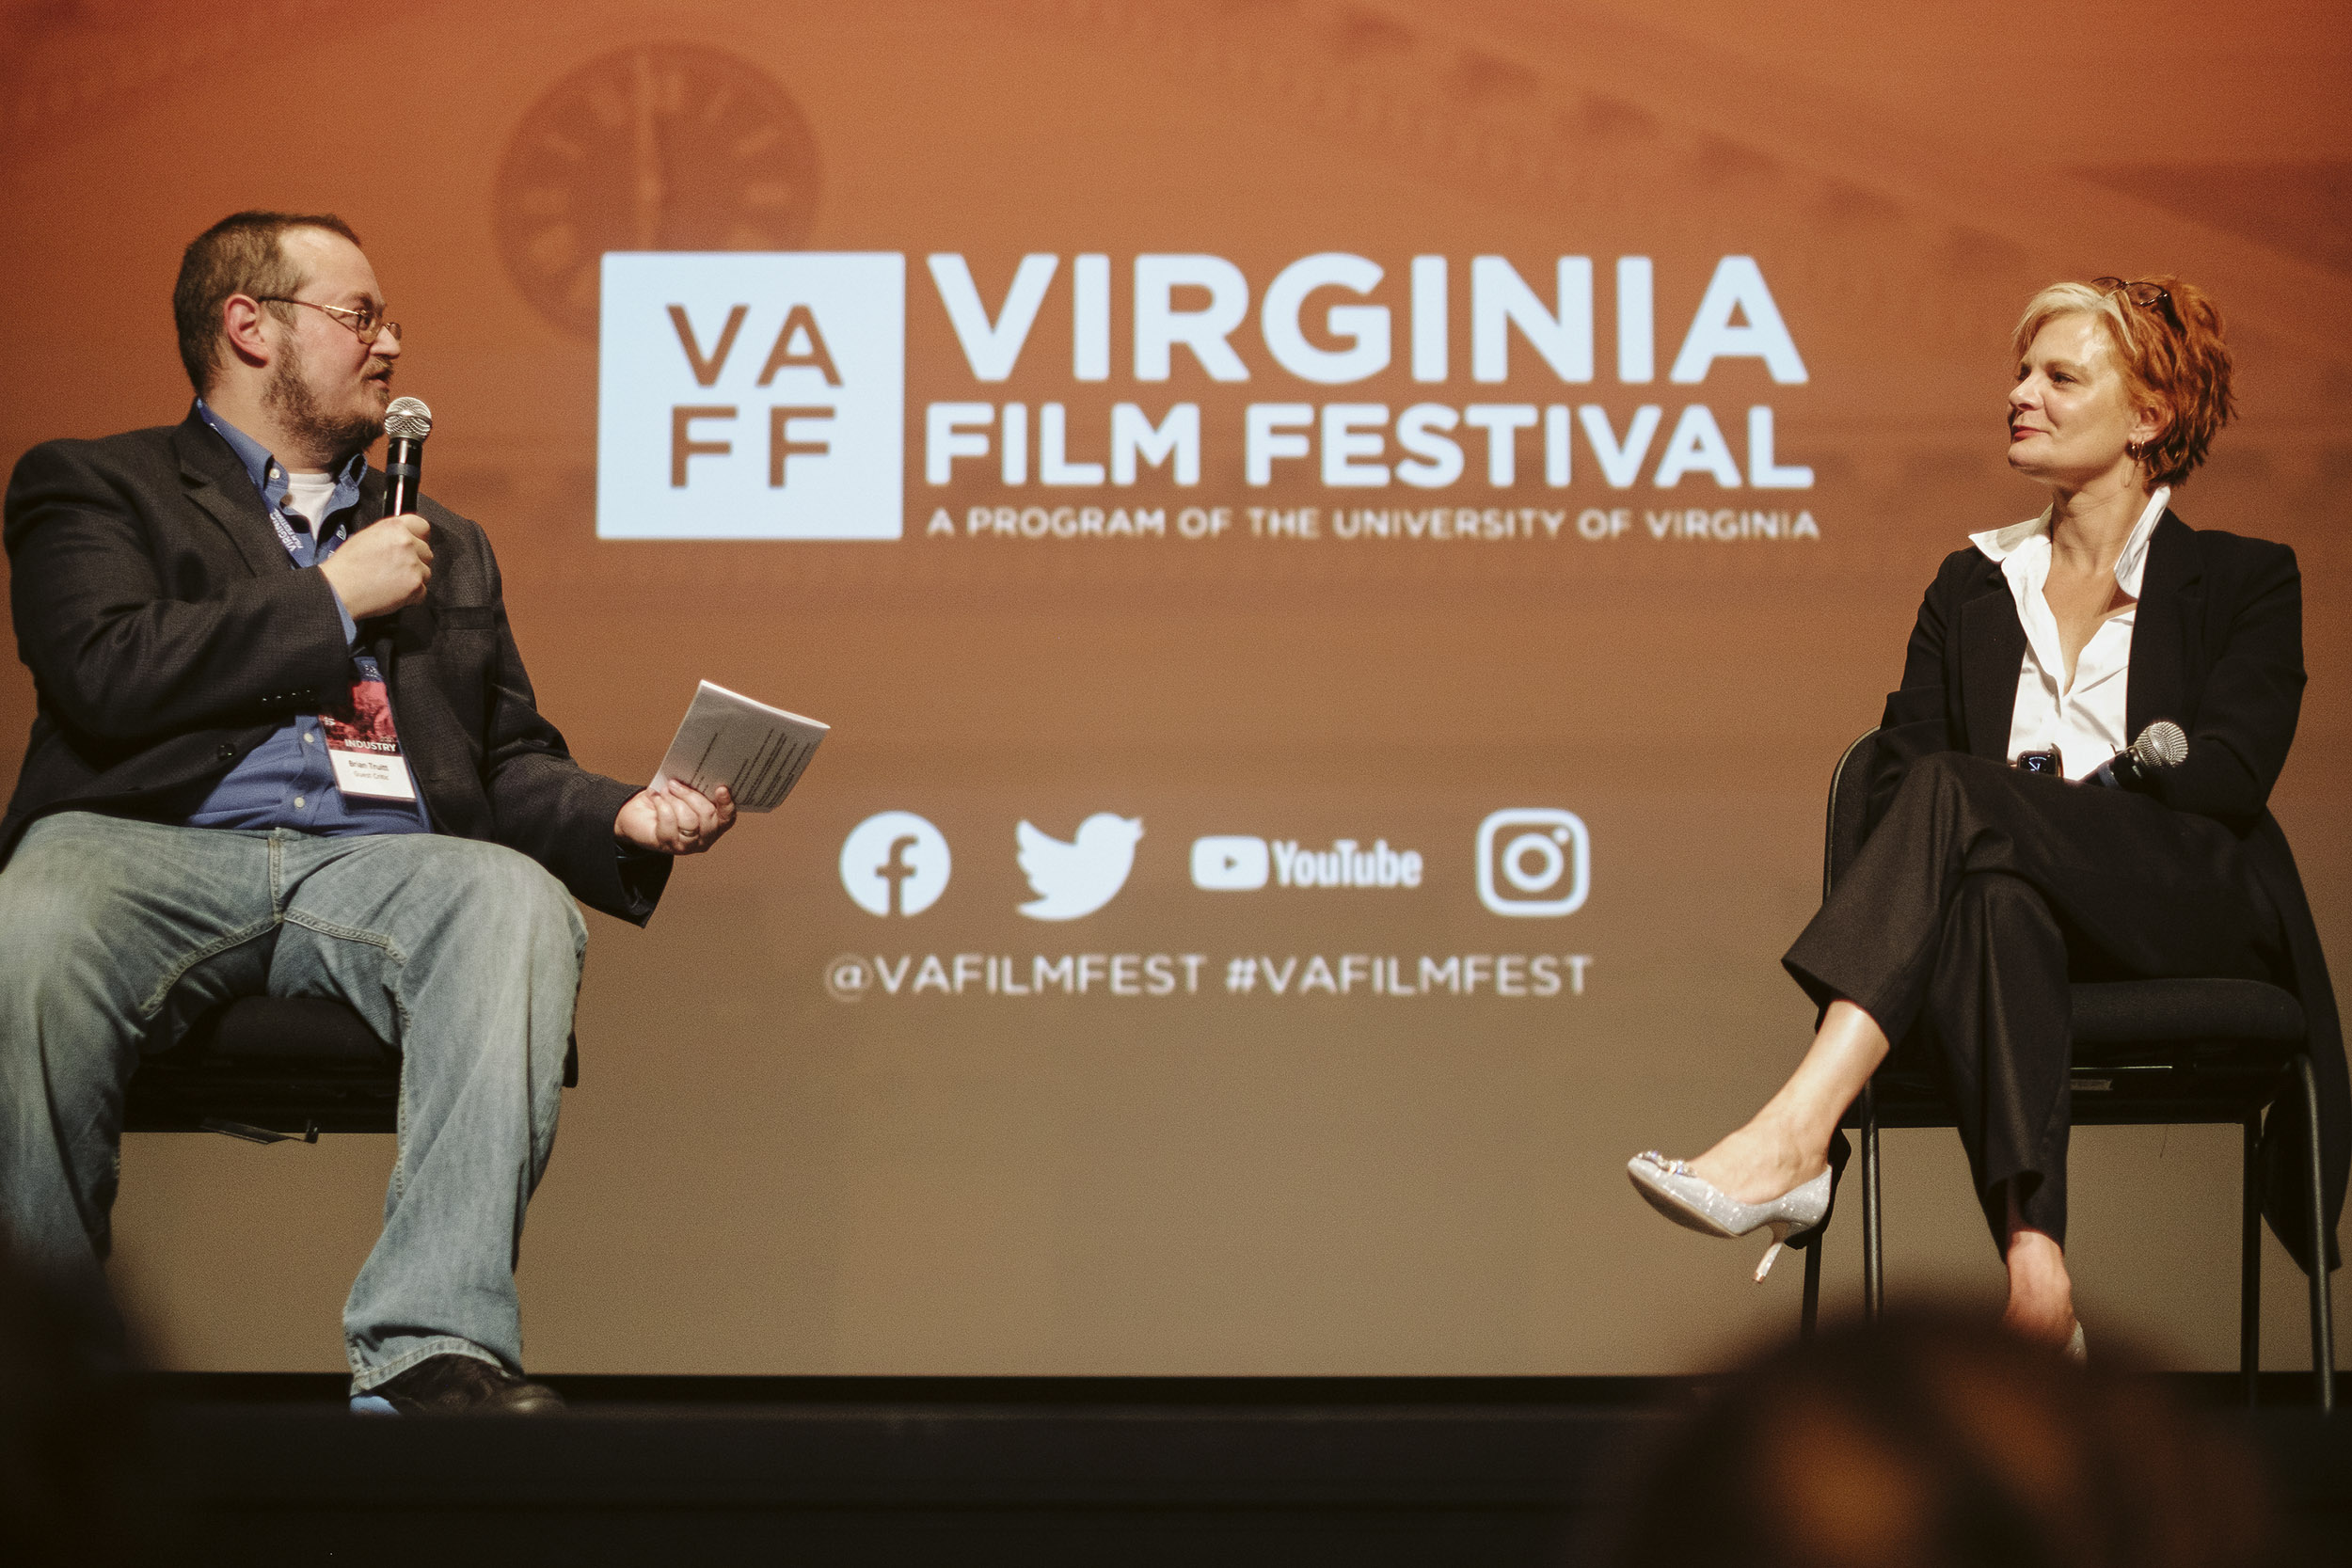 Man, left, speaking to a woman, right, on stage during the VA film festival